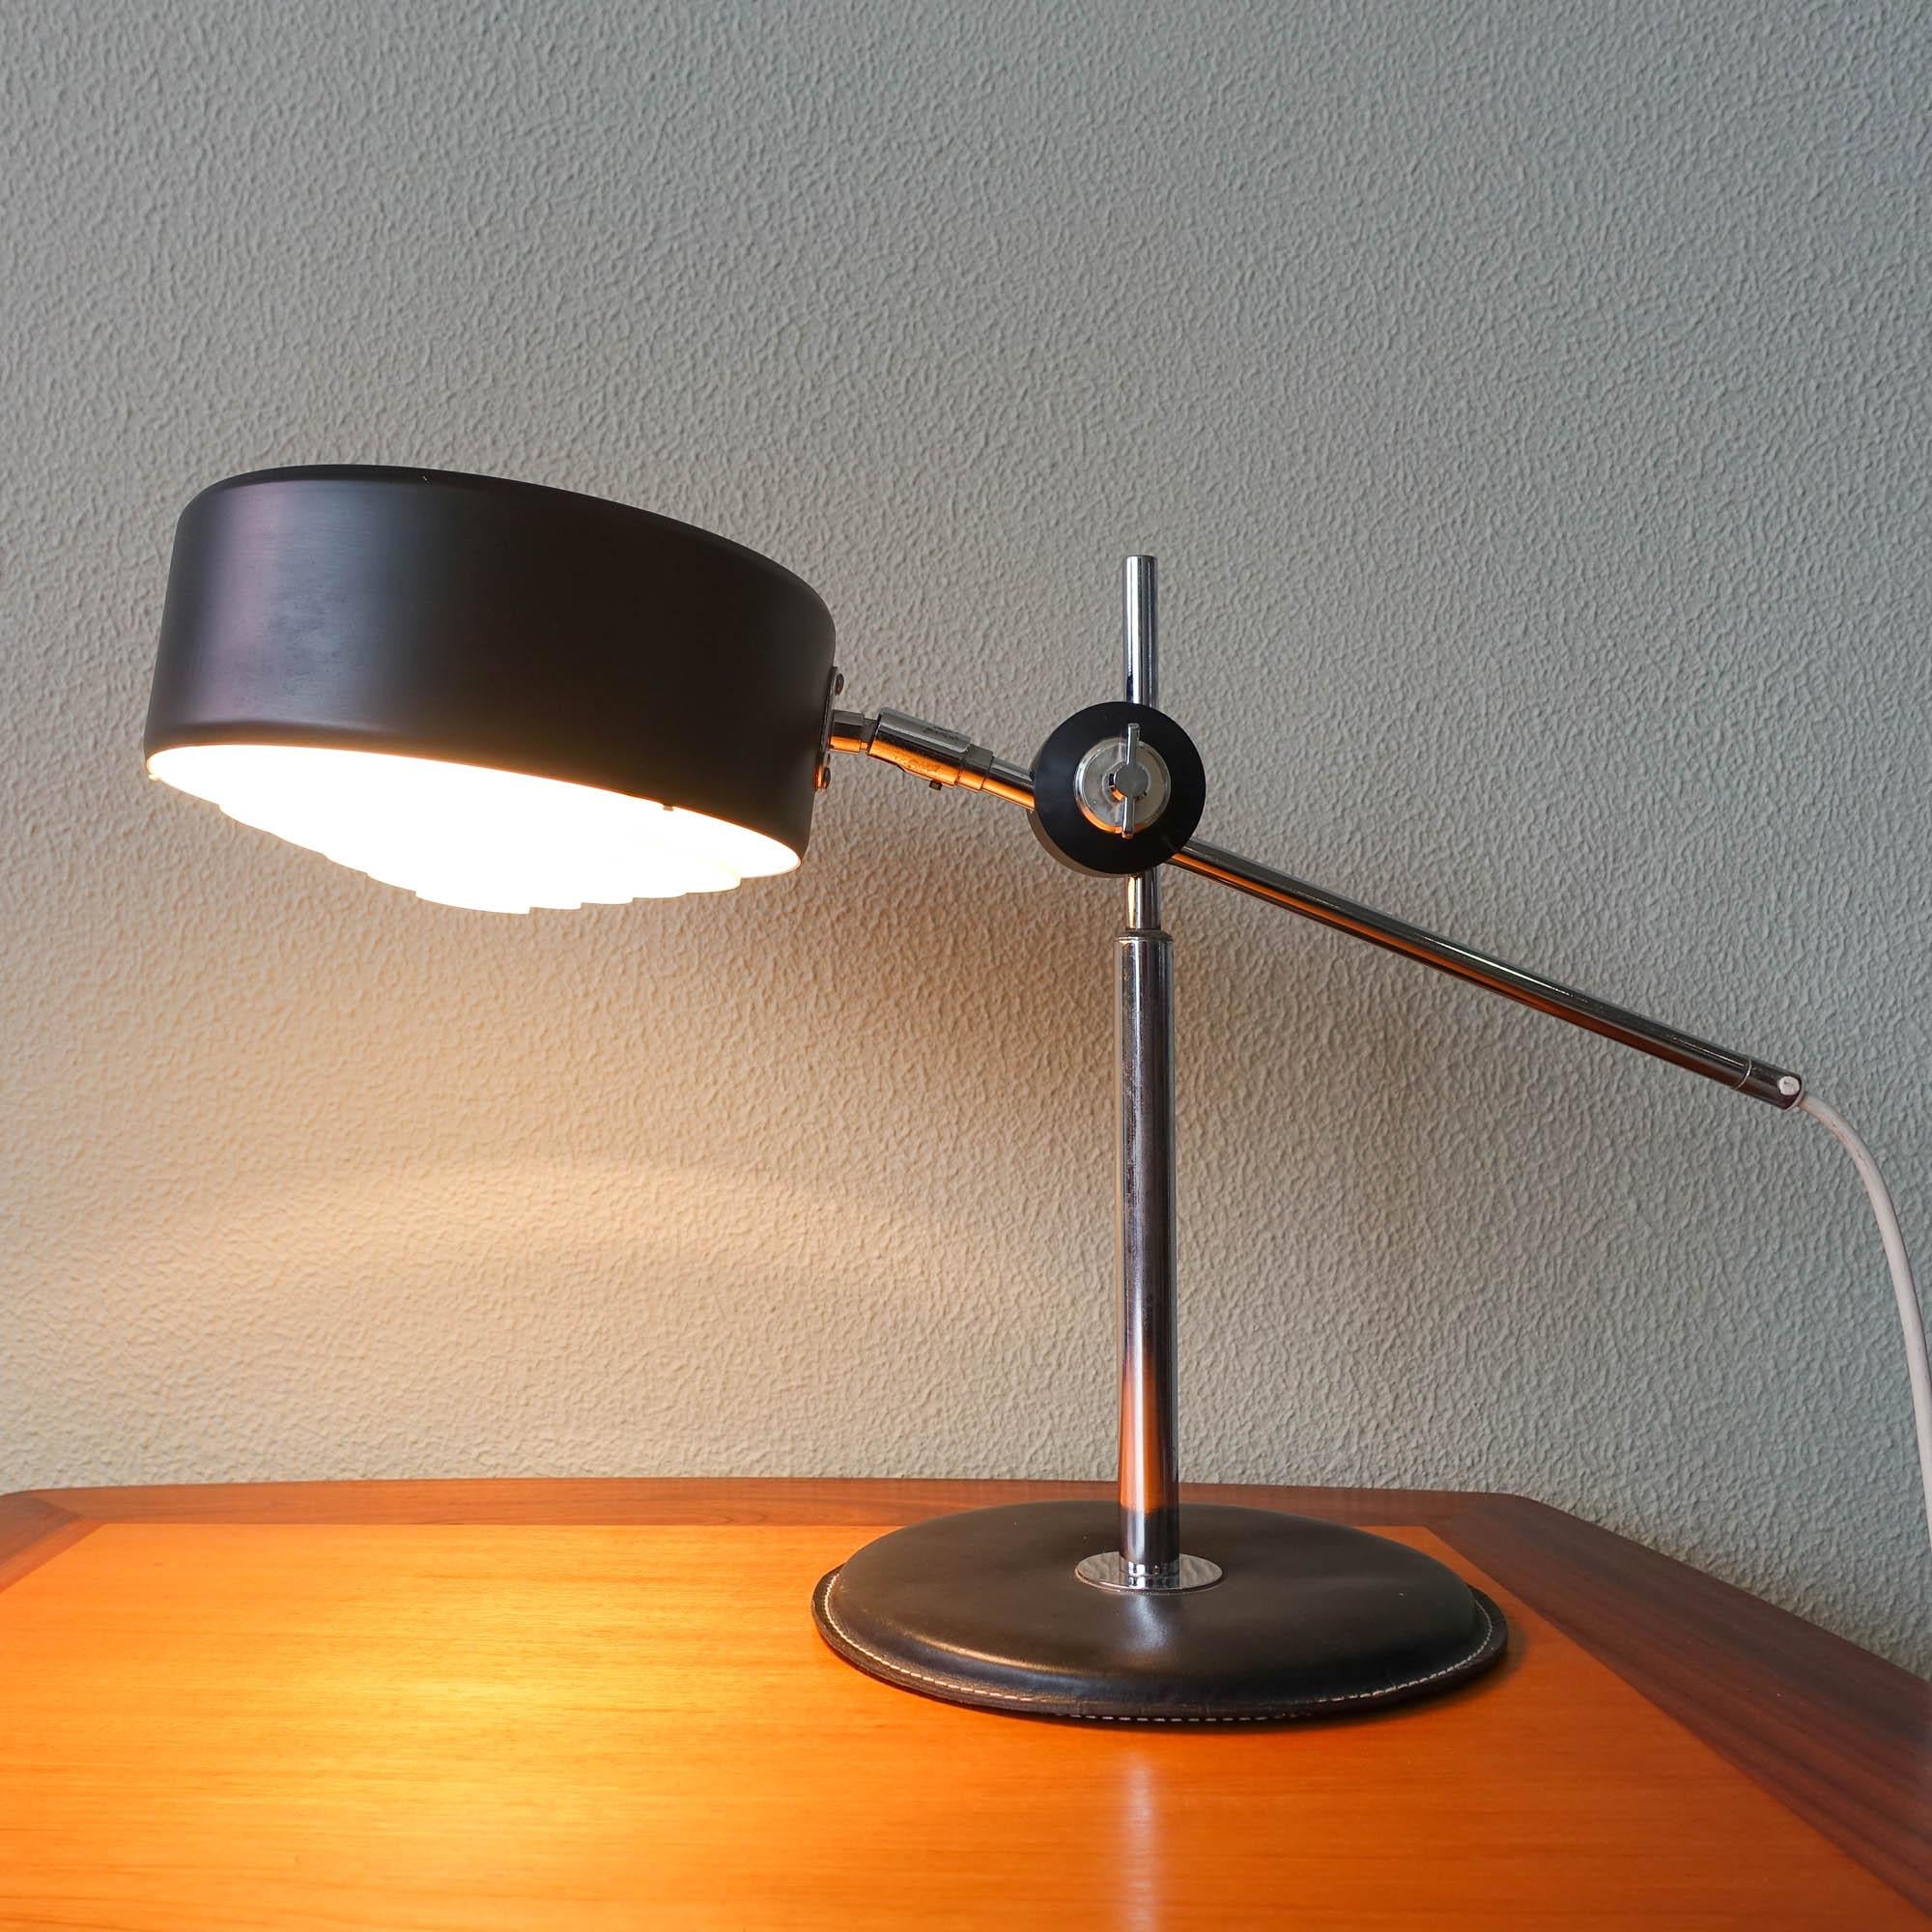 This Simris table lamp was designed by Anders Pehrson for Atelje Lyjktan Sweden in the early 70s. It has a black leather foot and chrome details to the lamp and black shade in metallic. It comes with two standard sockets and has three light settings.